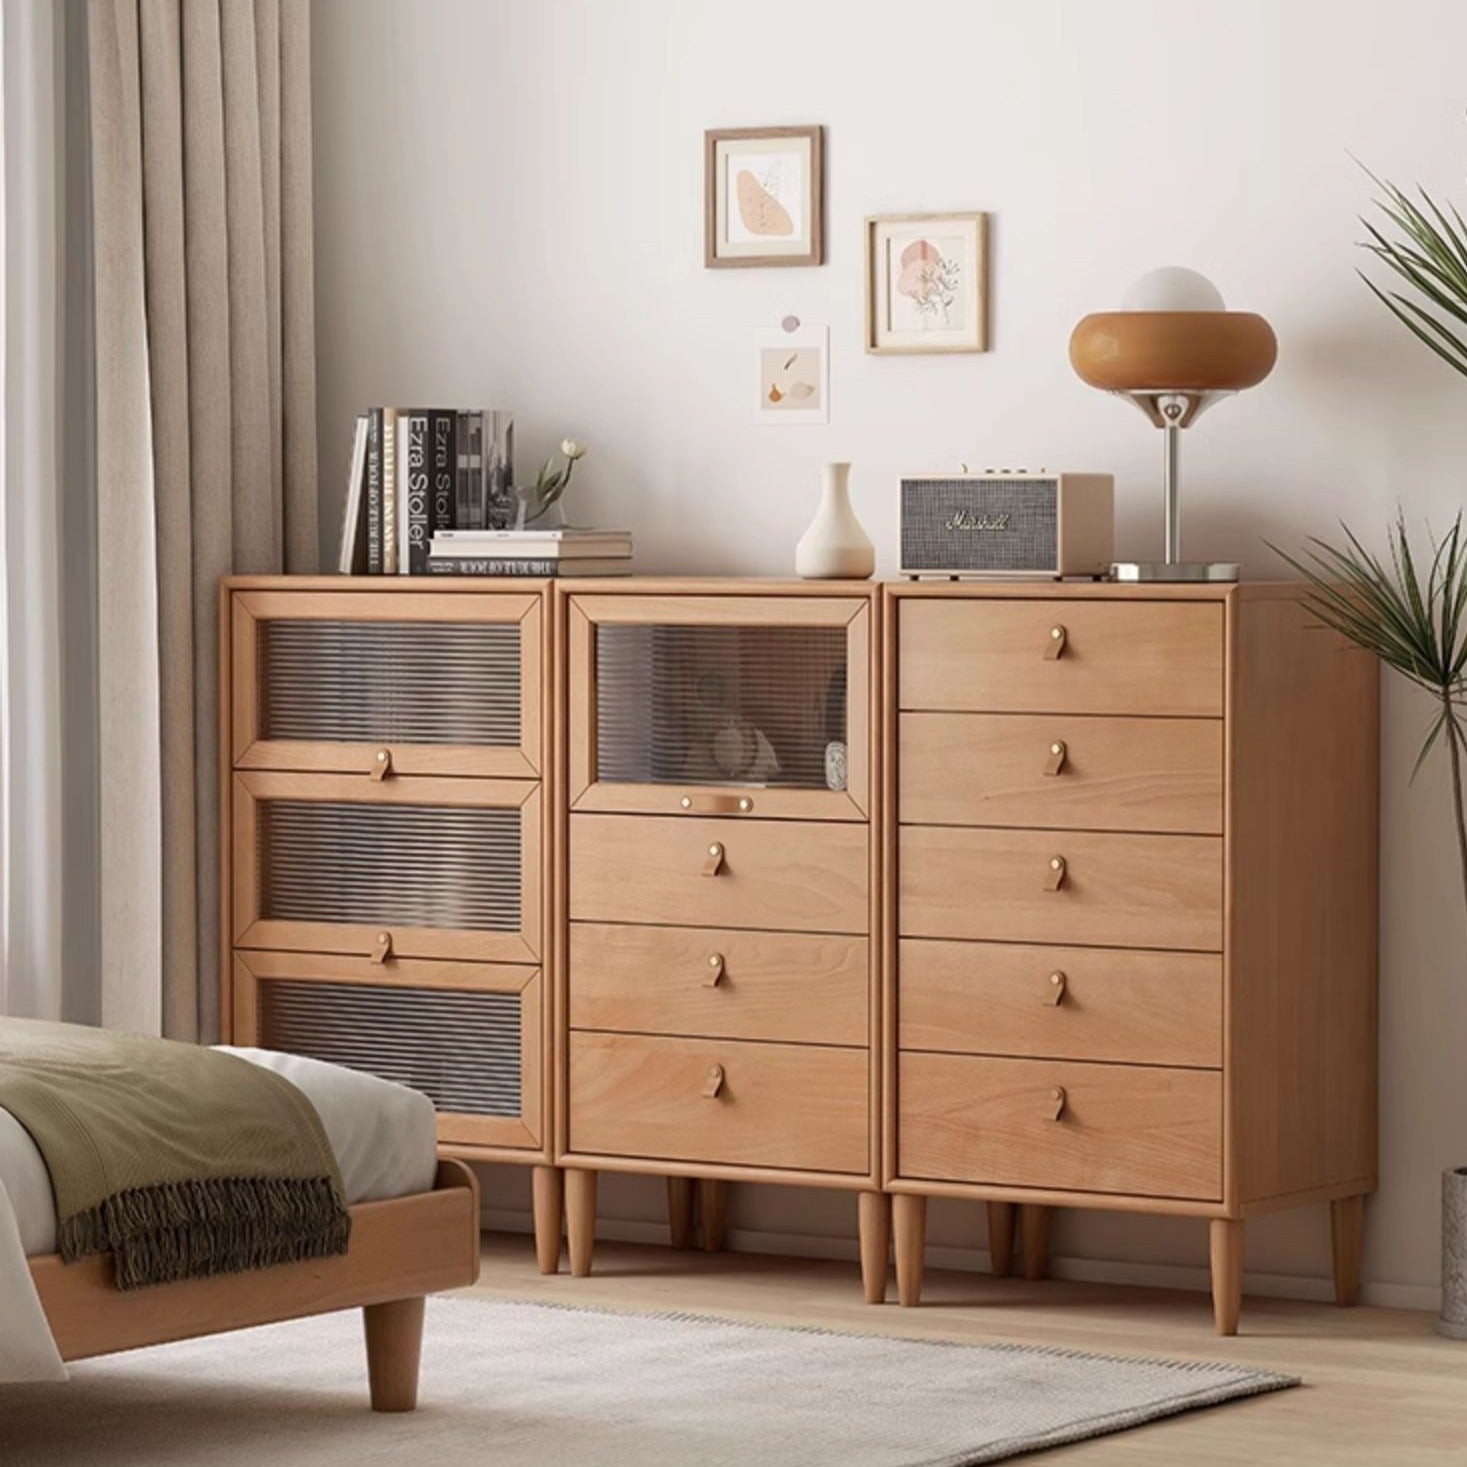 European beech chest of drawers combination